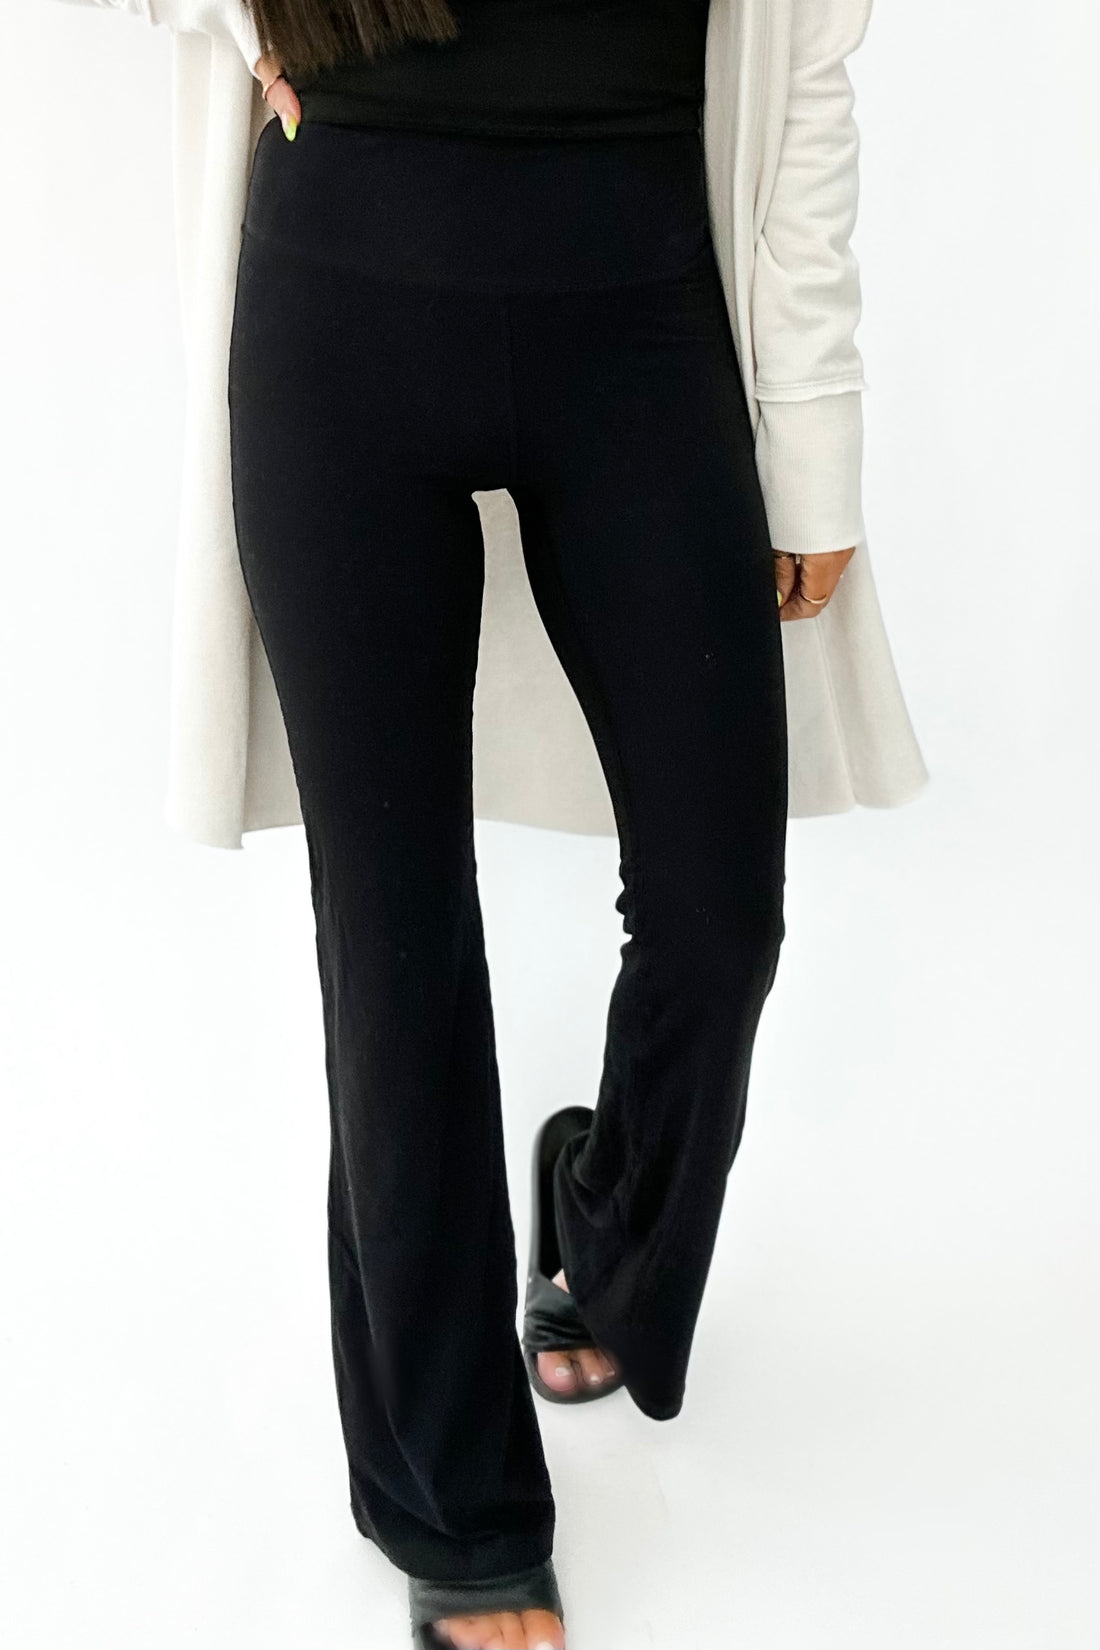 SWAY BUTTERY SOFT FLARED YOGA PANTS